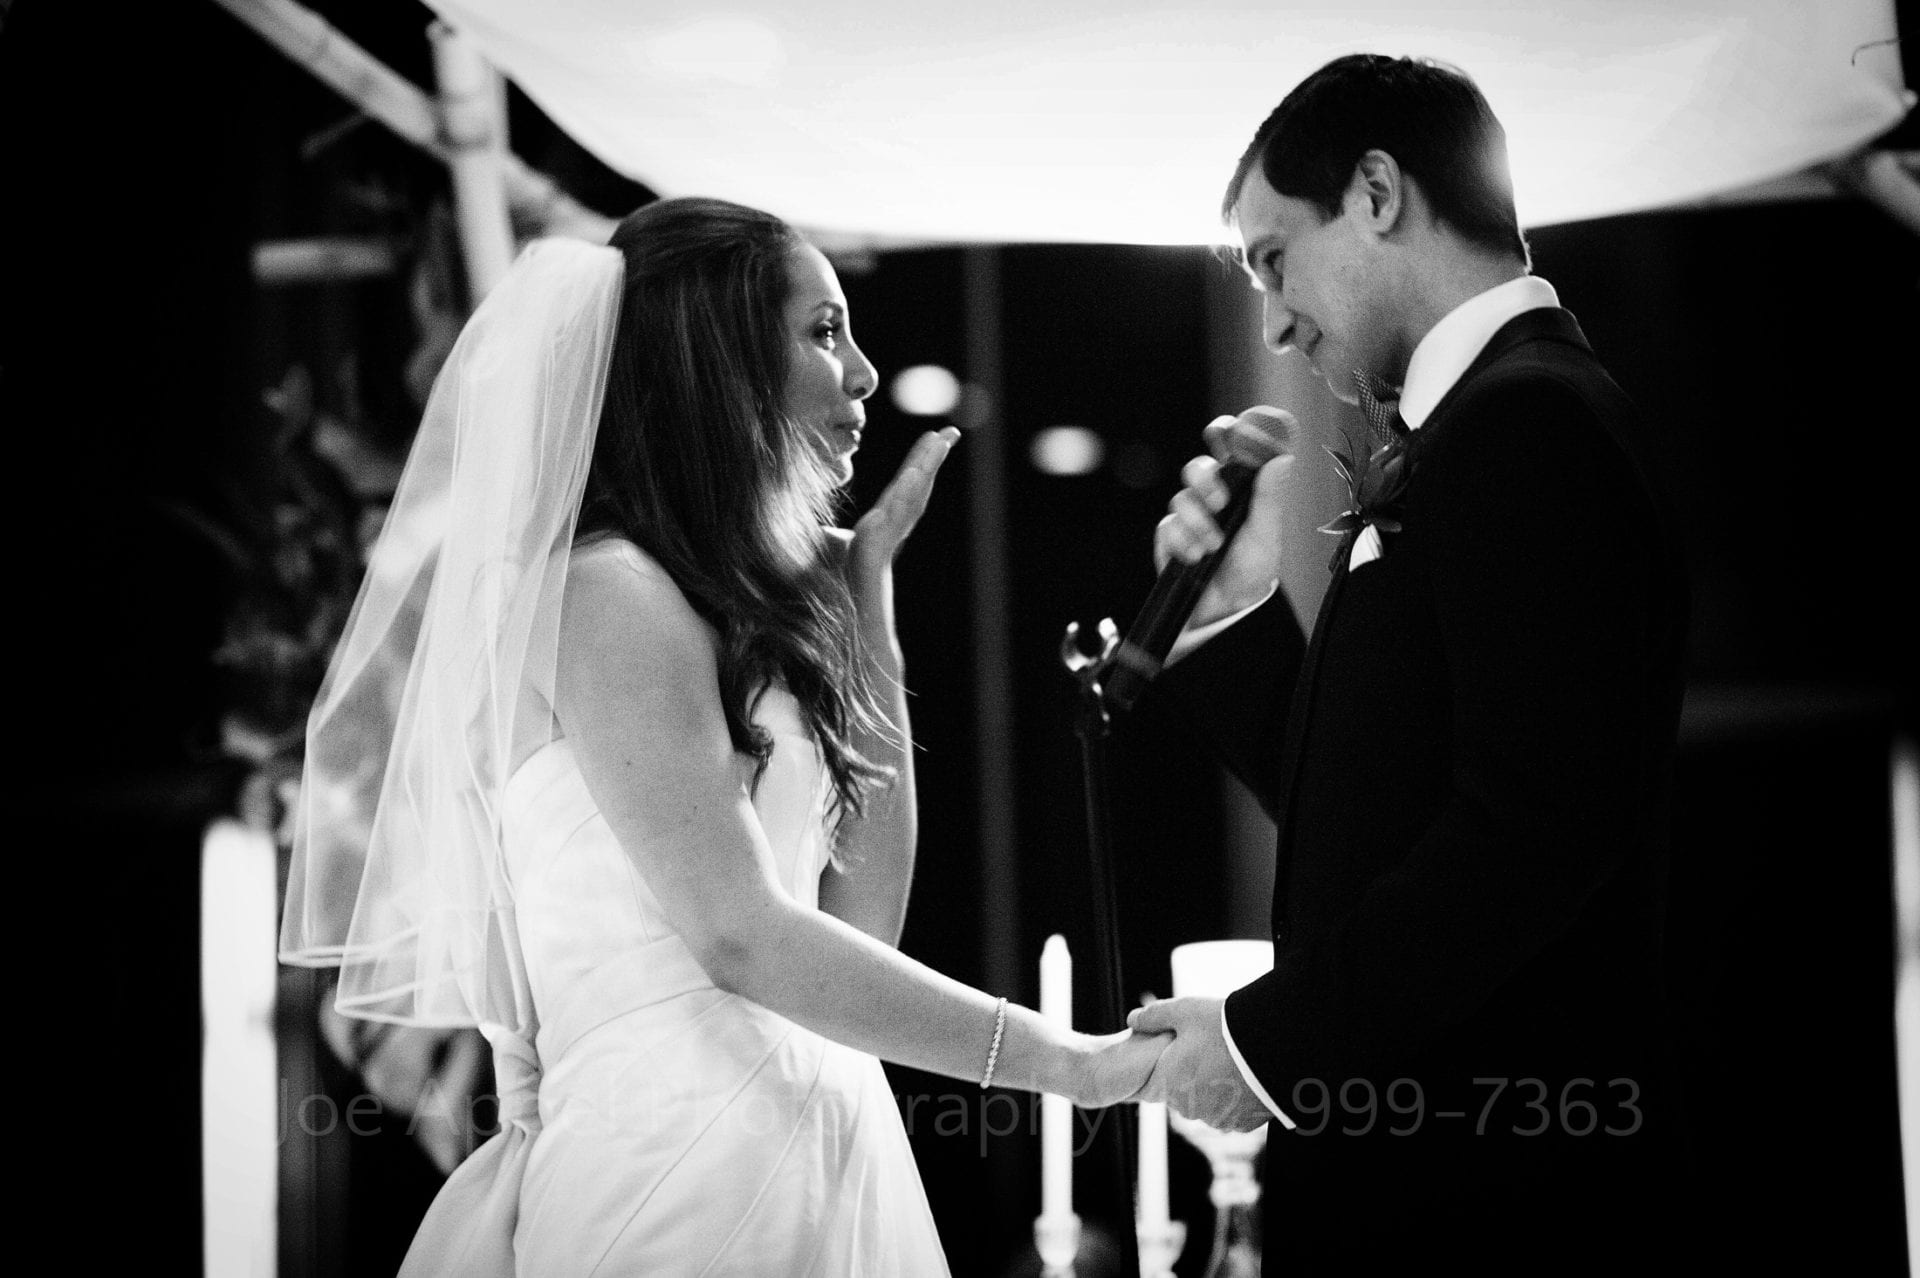 a bride blows a kiss at her groom as he speaks into a microphone